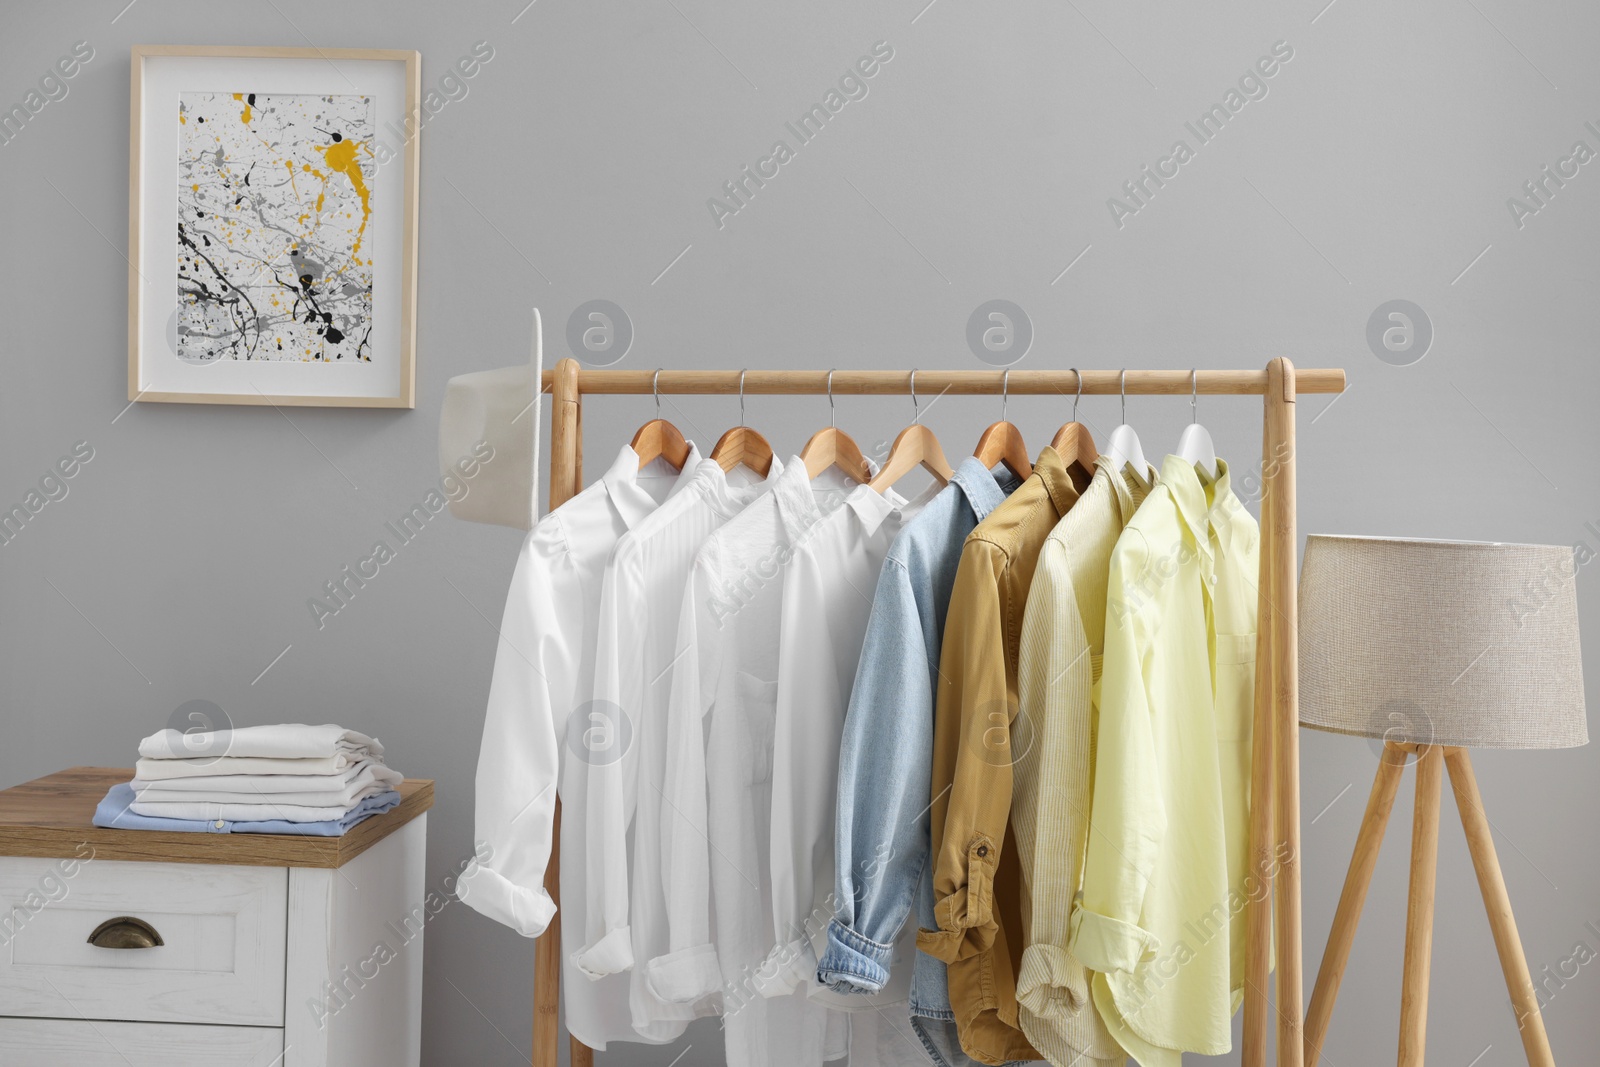 Photo of Rack with different stylish shirts, chest of drawers and lamp near grey wall indoors. Organizing clothes